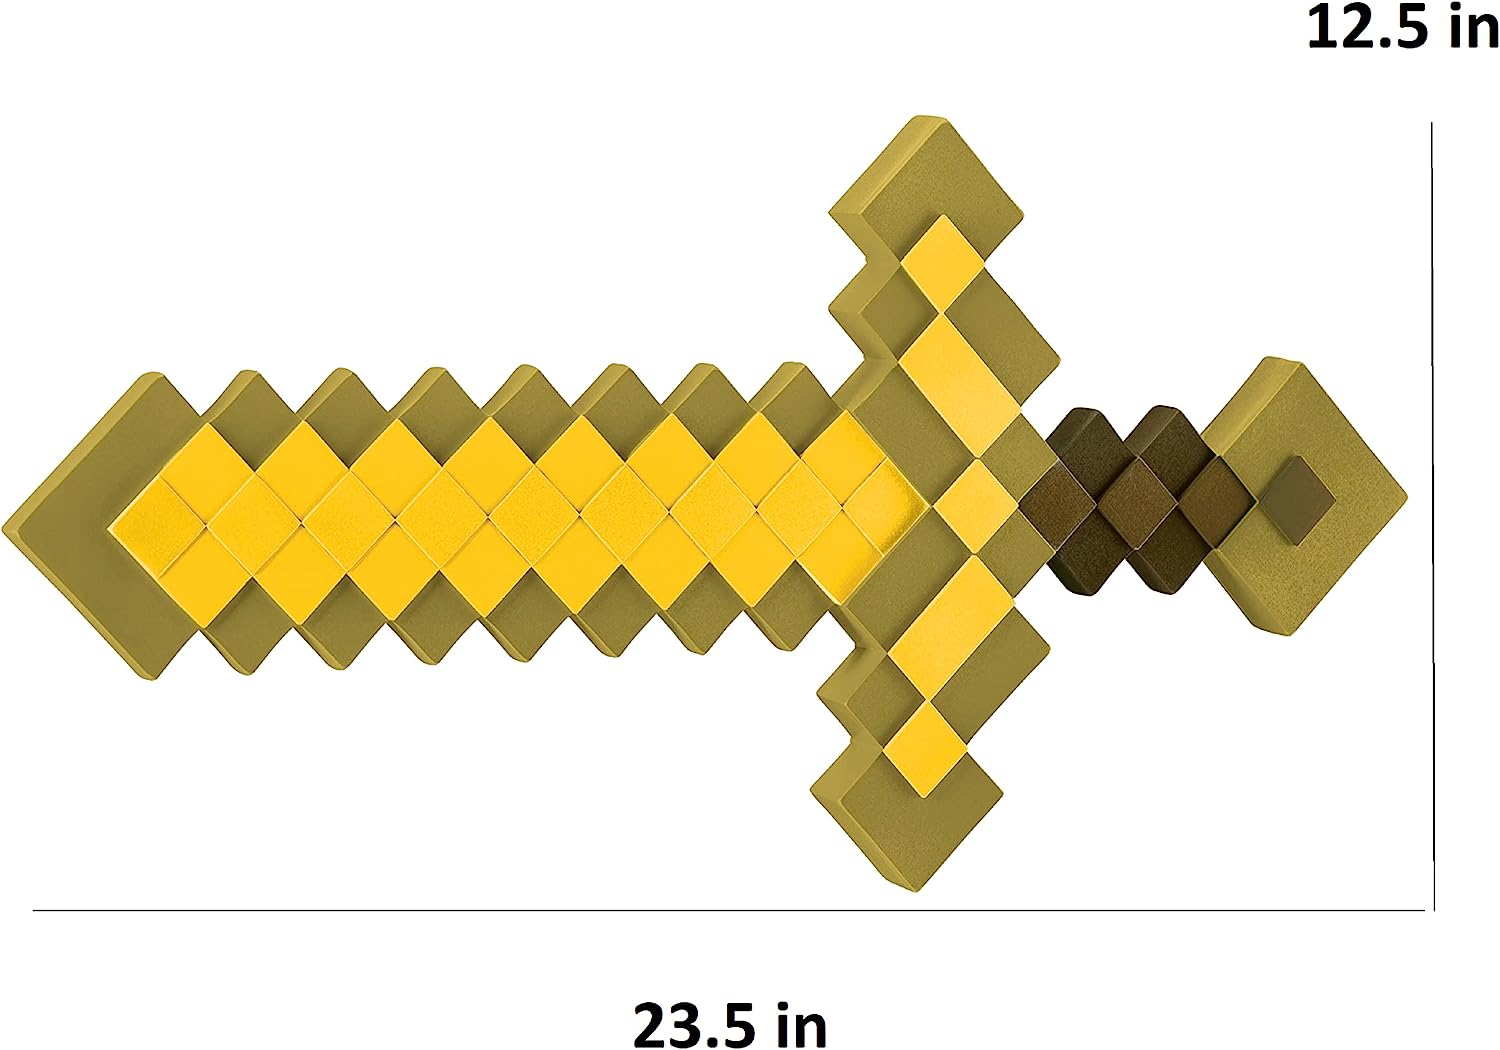 Official Minecraft Gold Sword